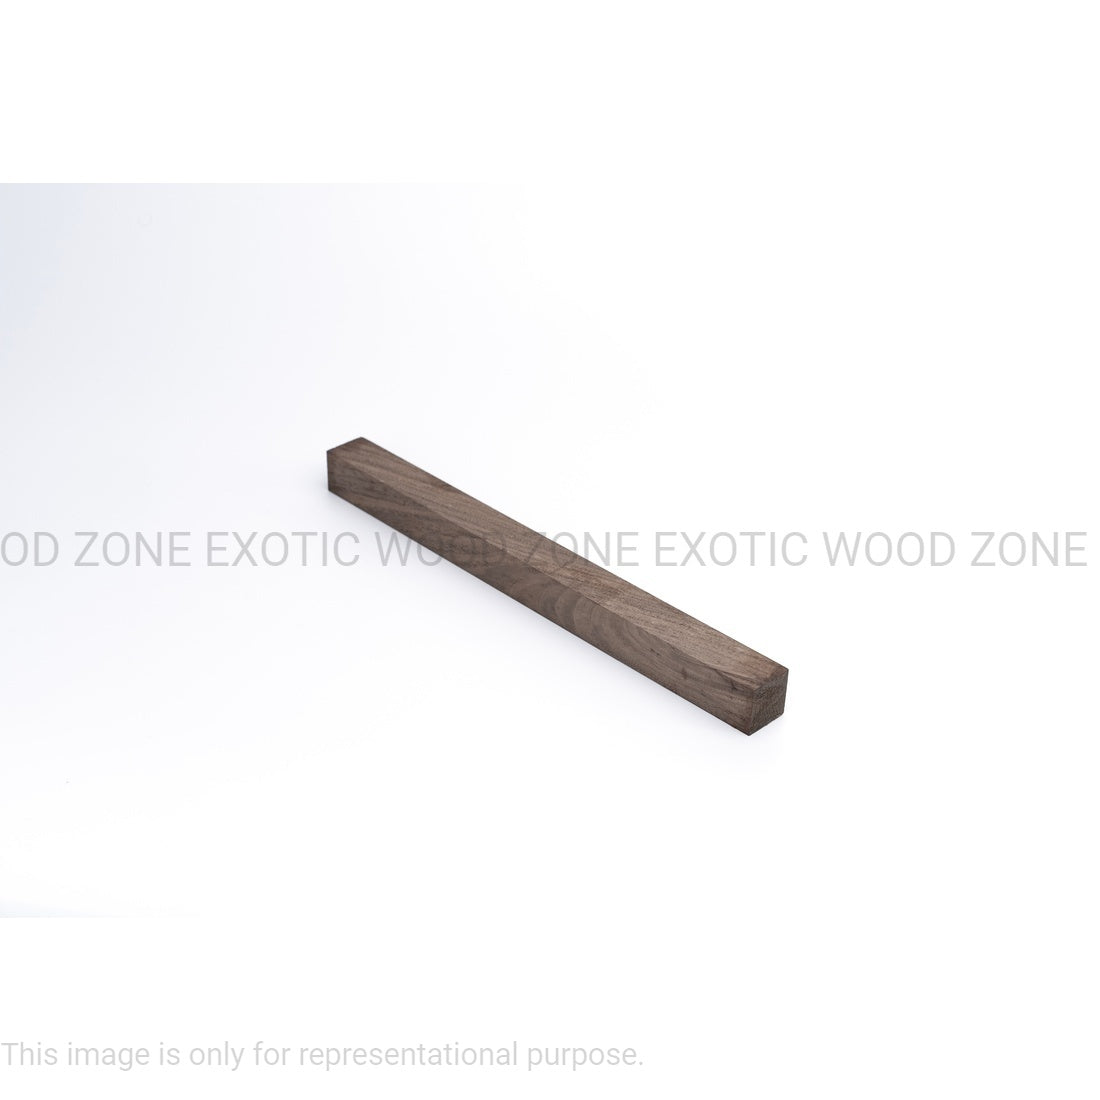 Black Walnut Hobbywood Blank 1&quot; x 1&quot; x 12&quot; inches Exotic Wood Zone